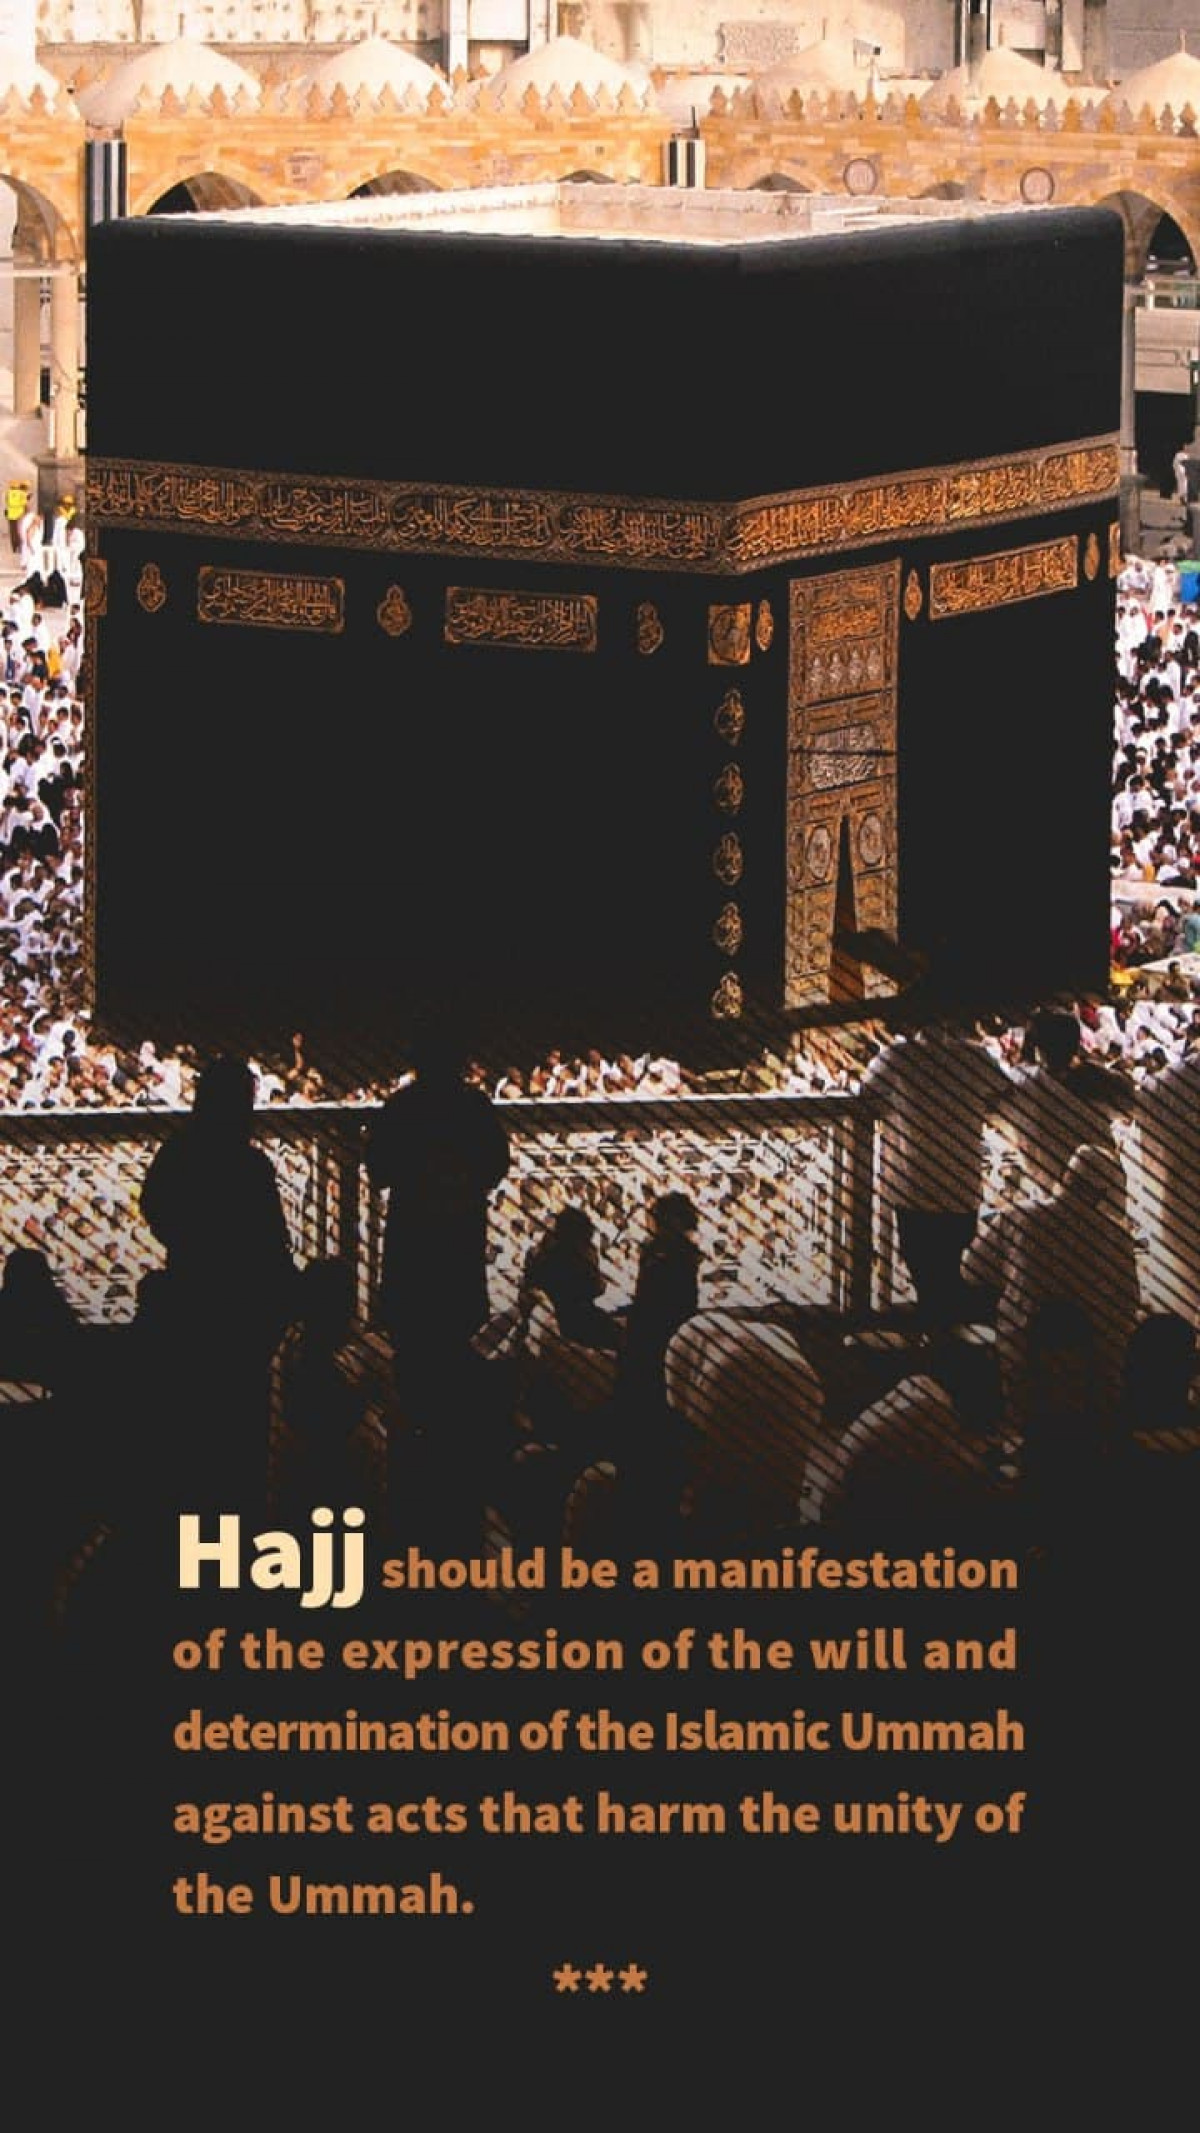 Hajj should be a manifestation of the expression of the will and determination of the Islamic Ummah